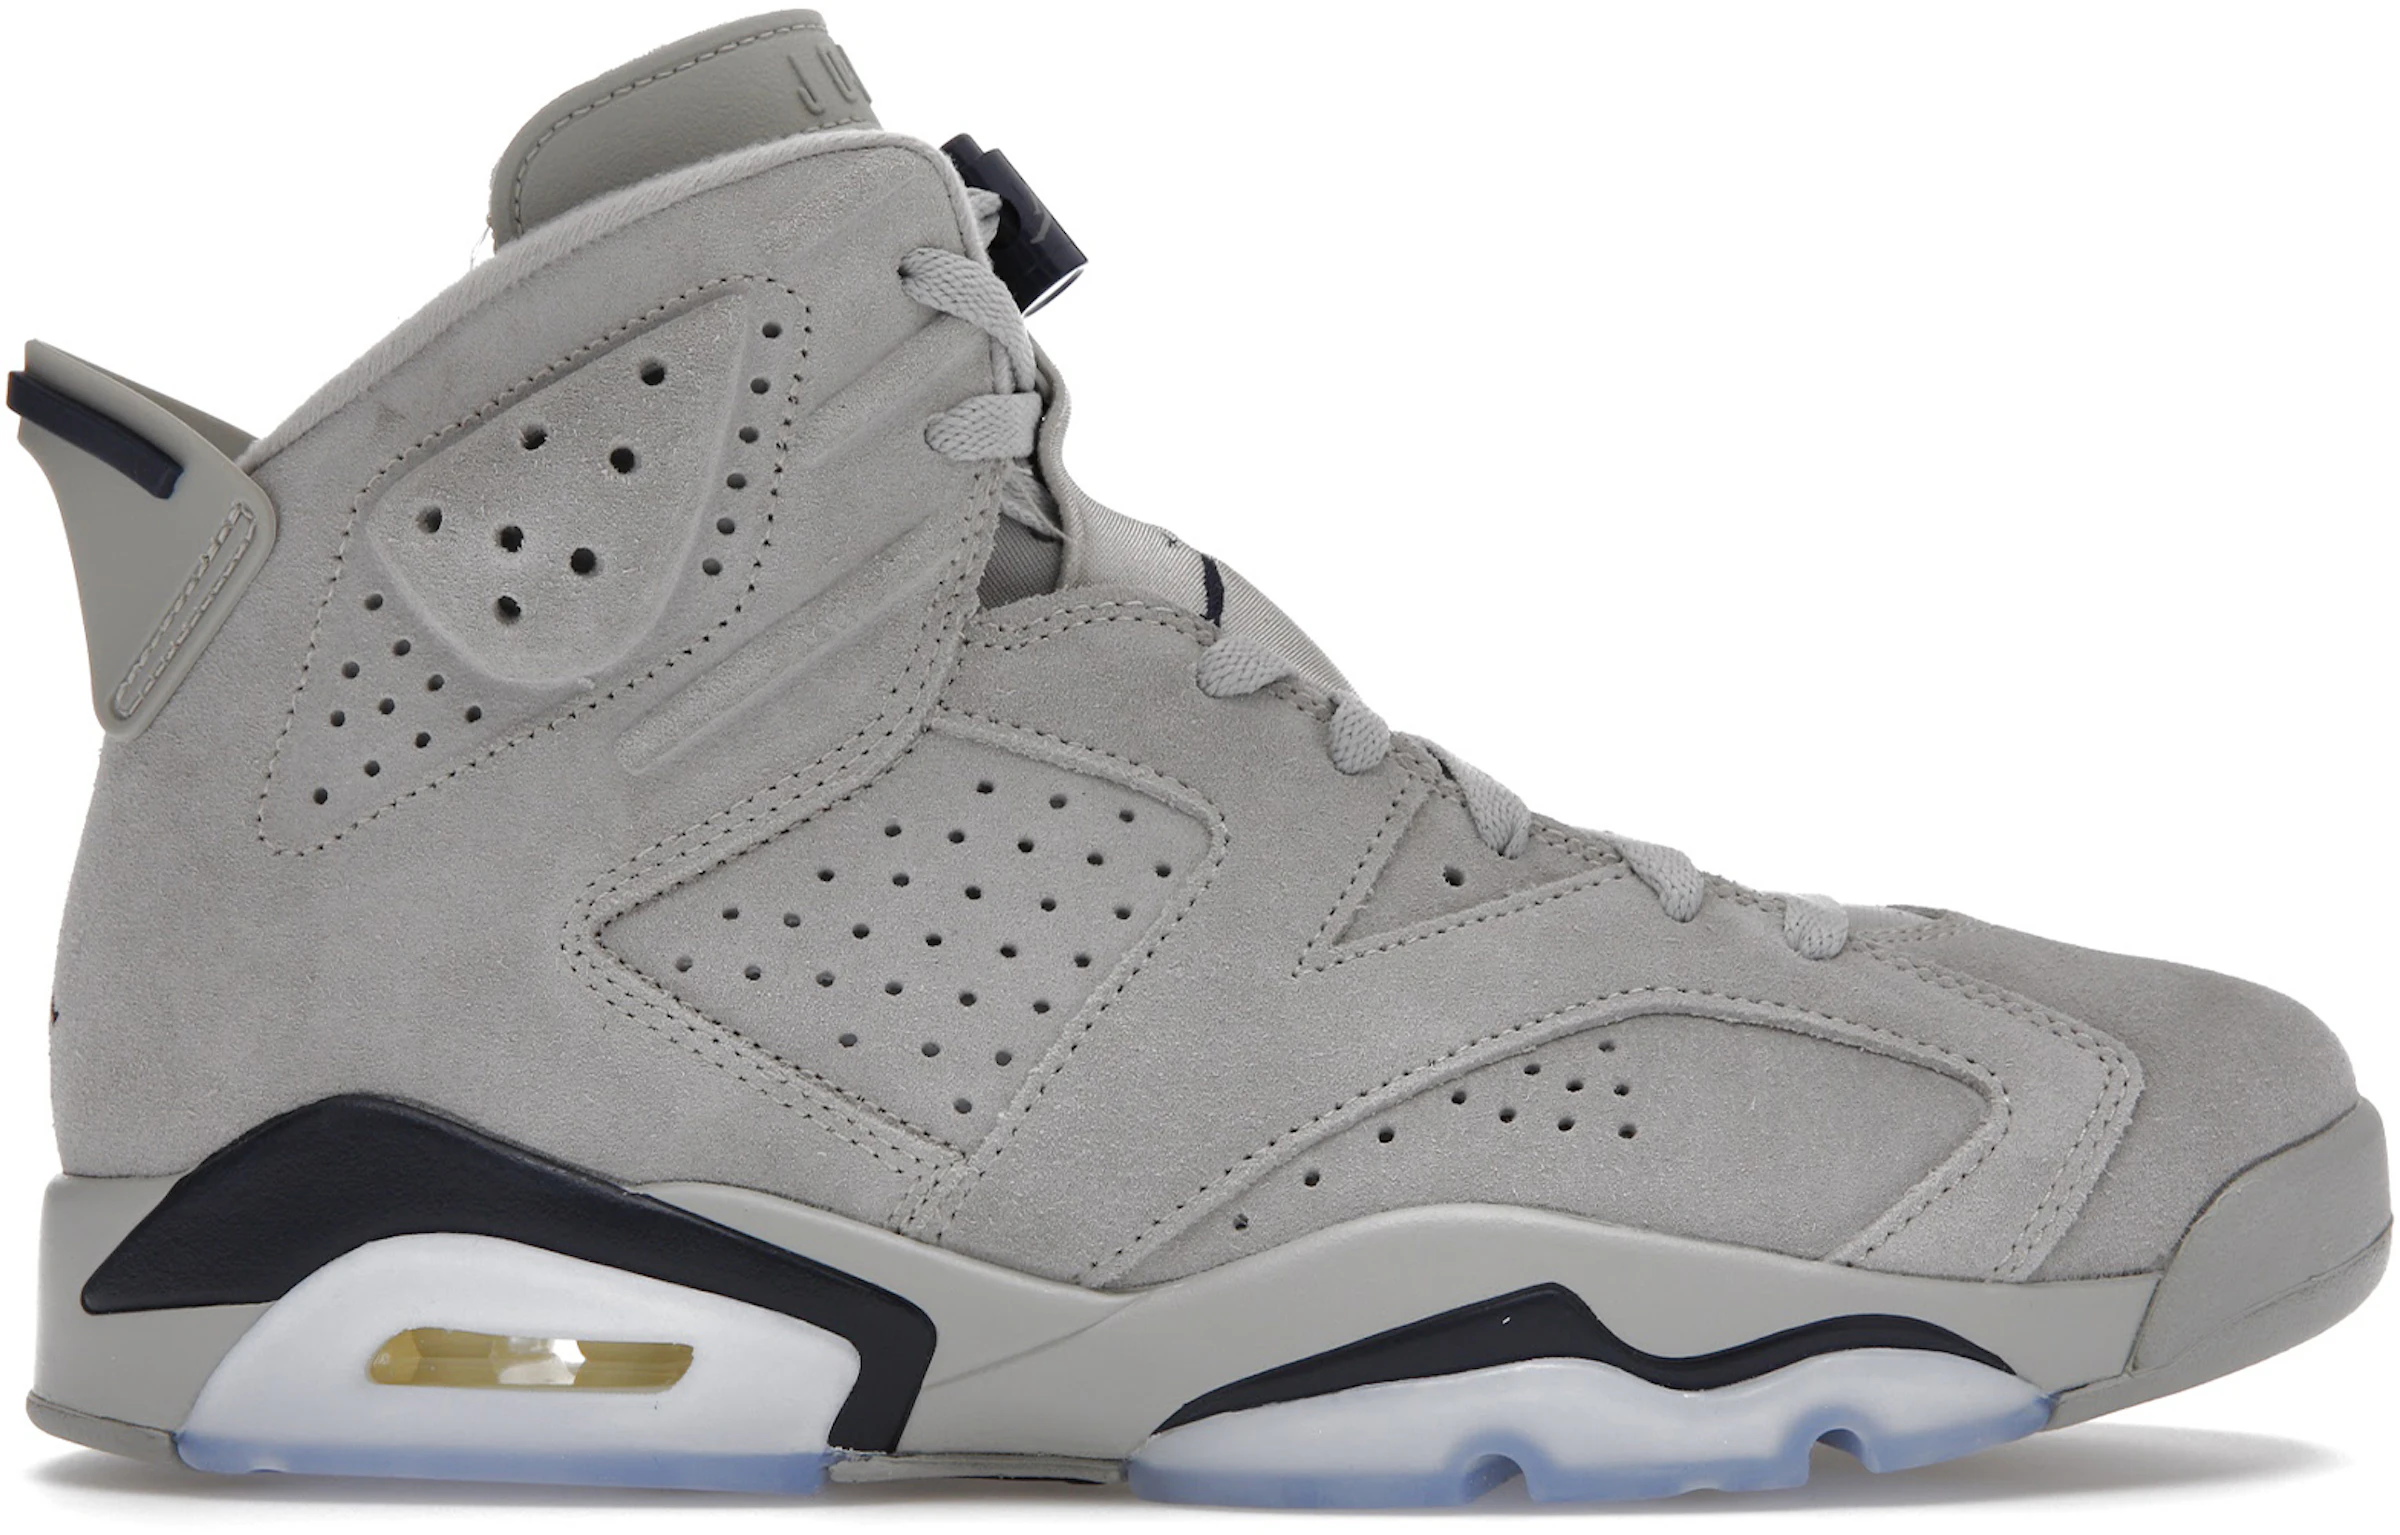 Jordan 6 - All Sizes & Colorways from $74 at StockX